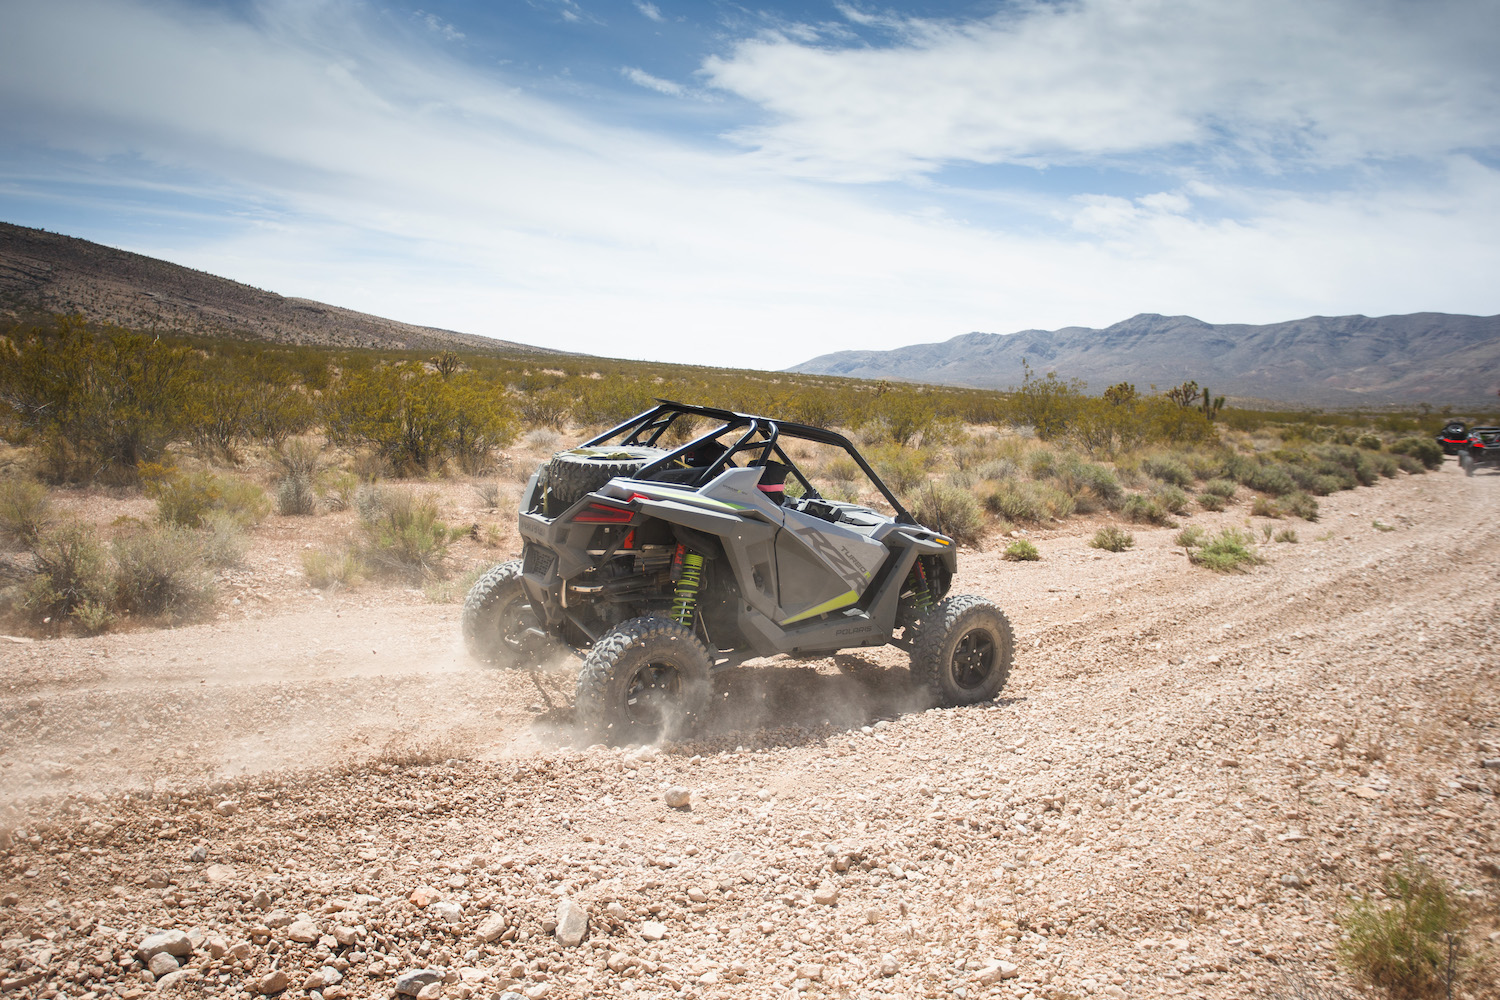 Rear end angle of Polaris RZR Turbo R on a dirt trail in the desert with mountains in the background.